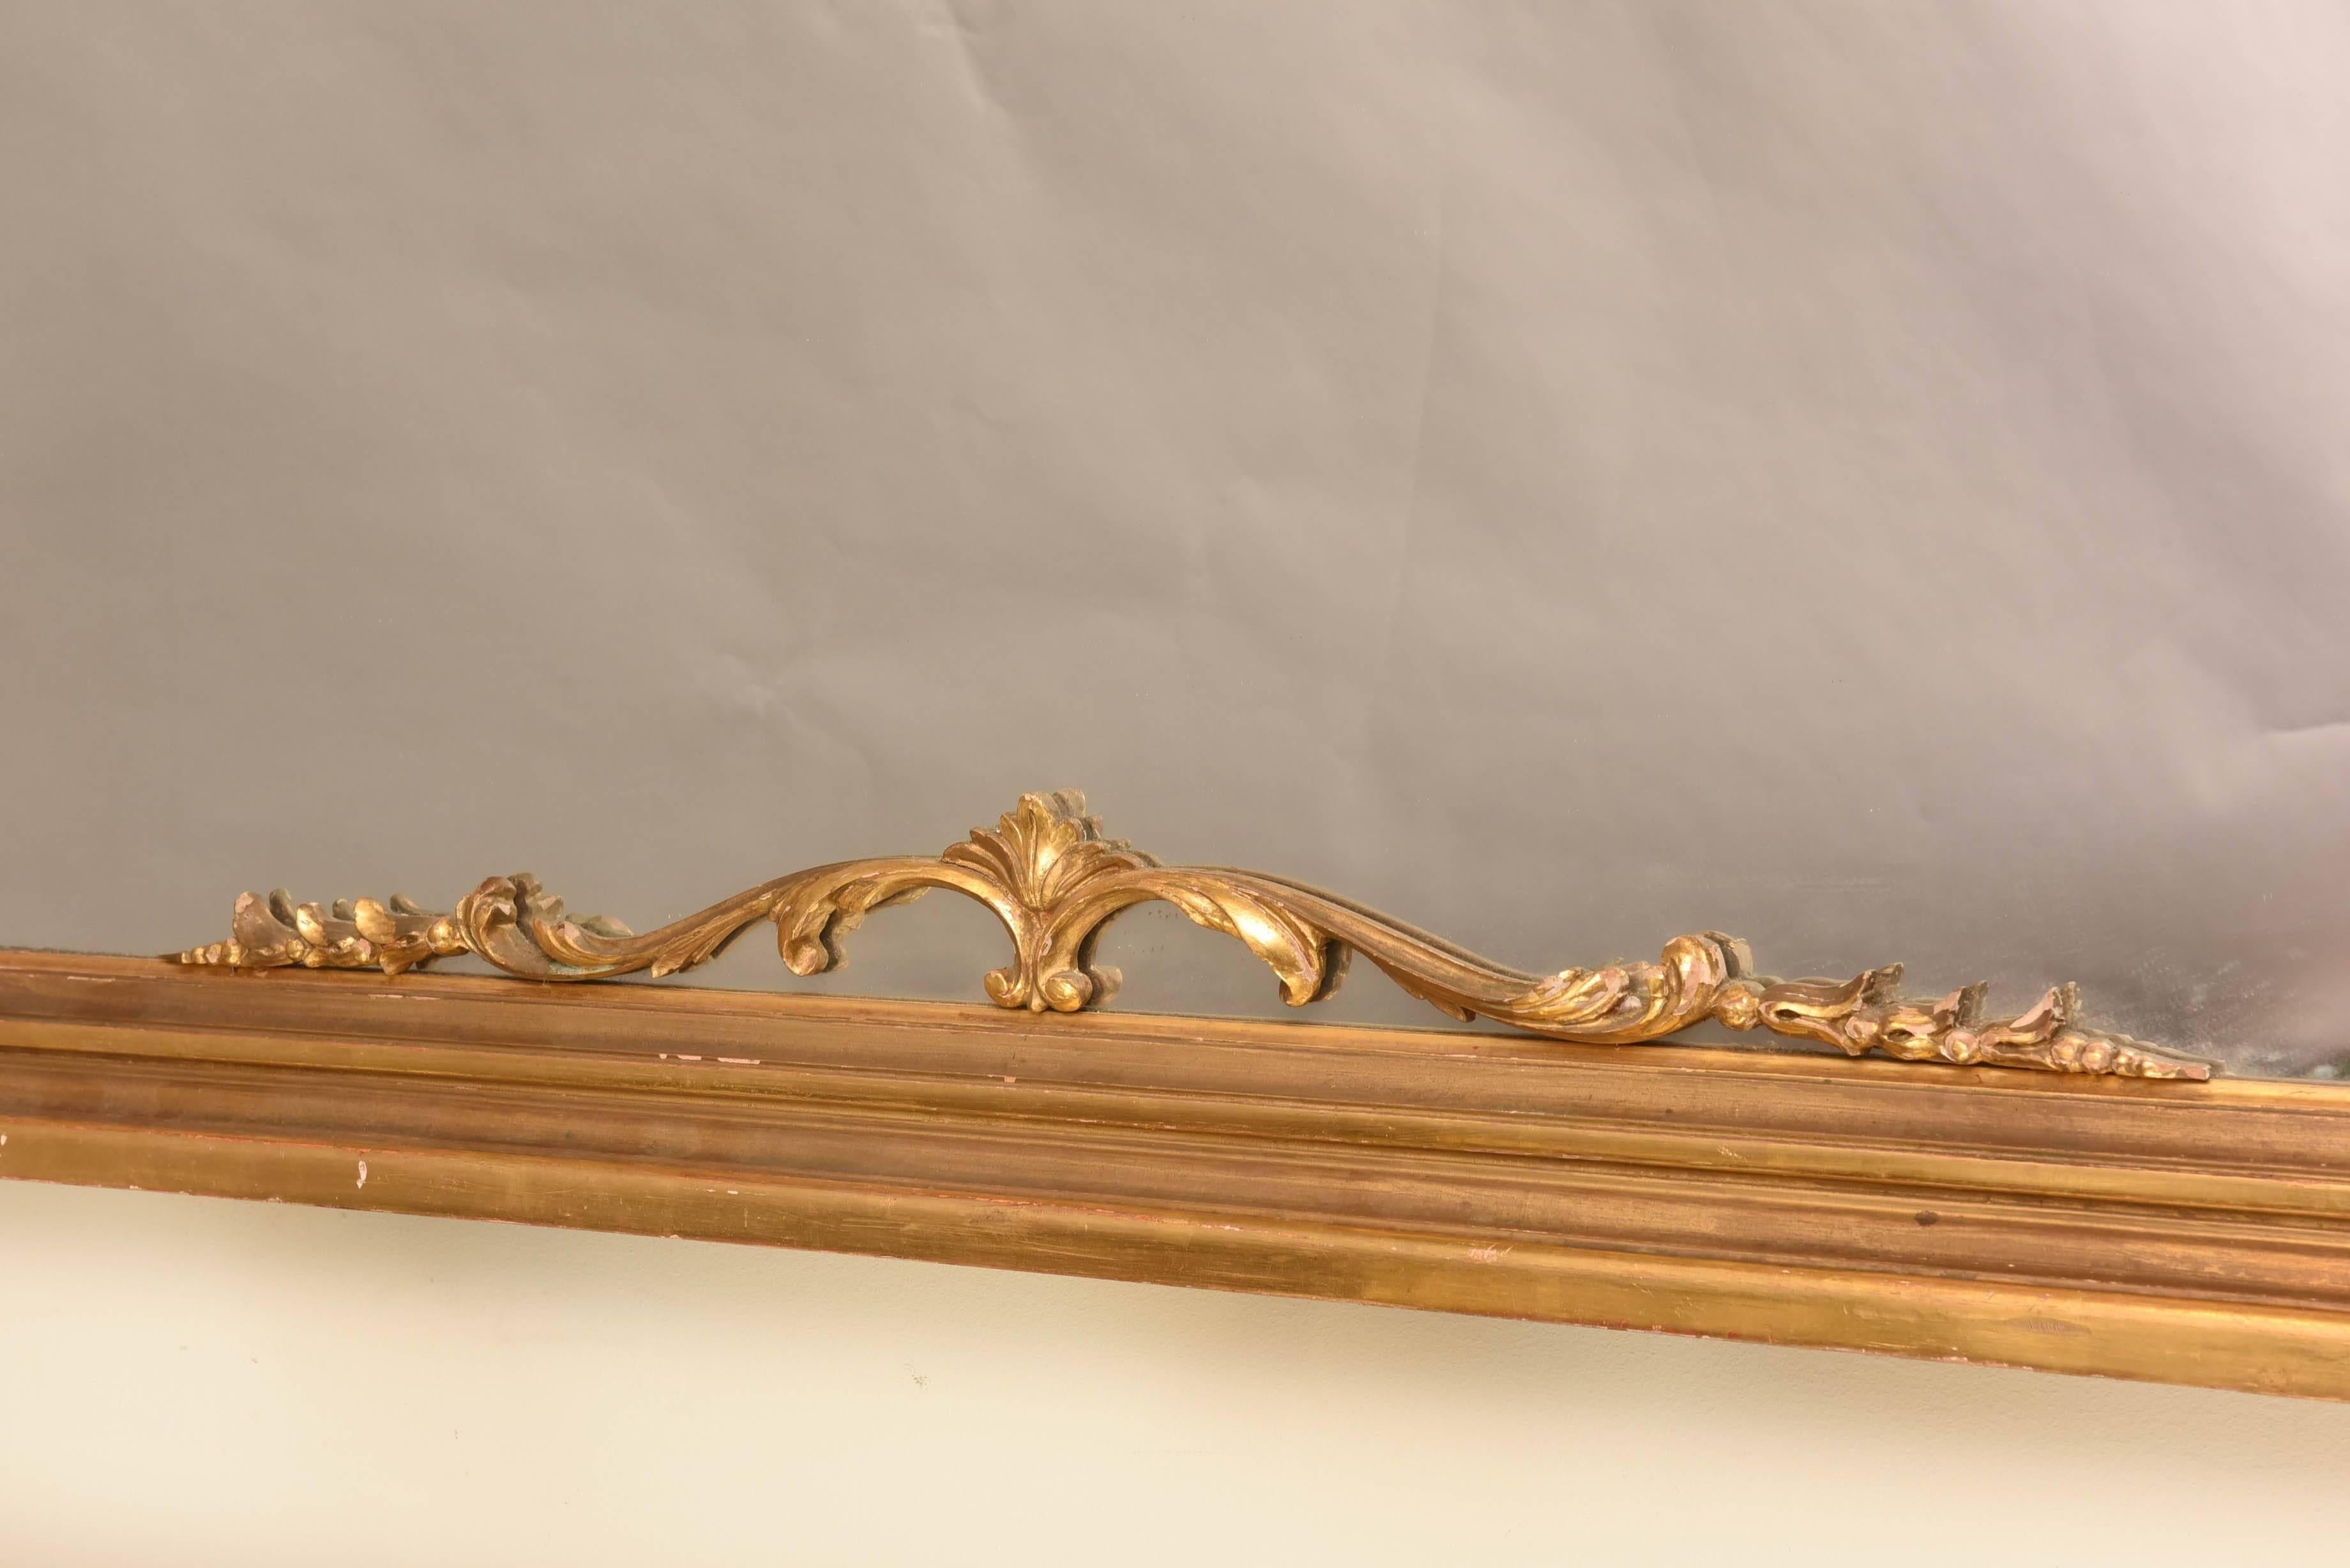 Large Sized, Victorian Giltwood Overmantle Mirror, with Scrolling Pediment 1